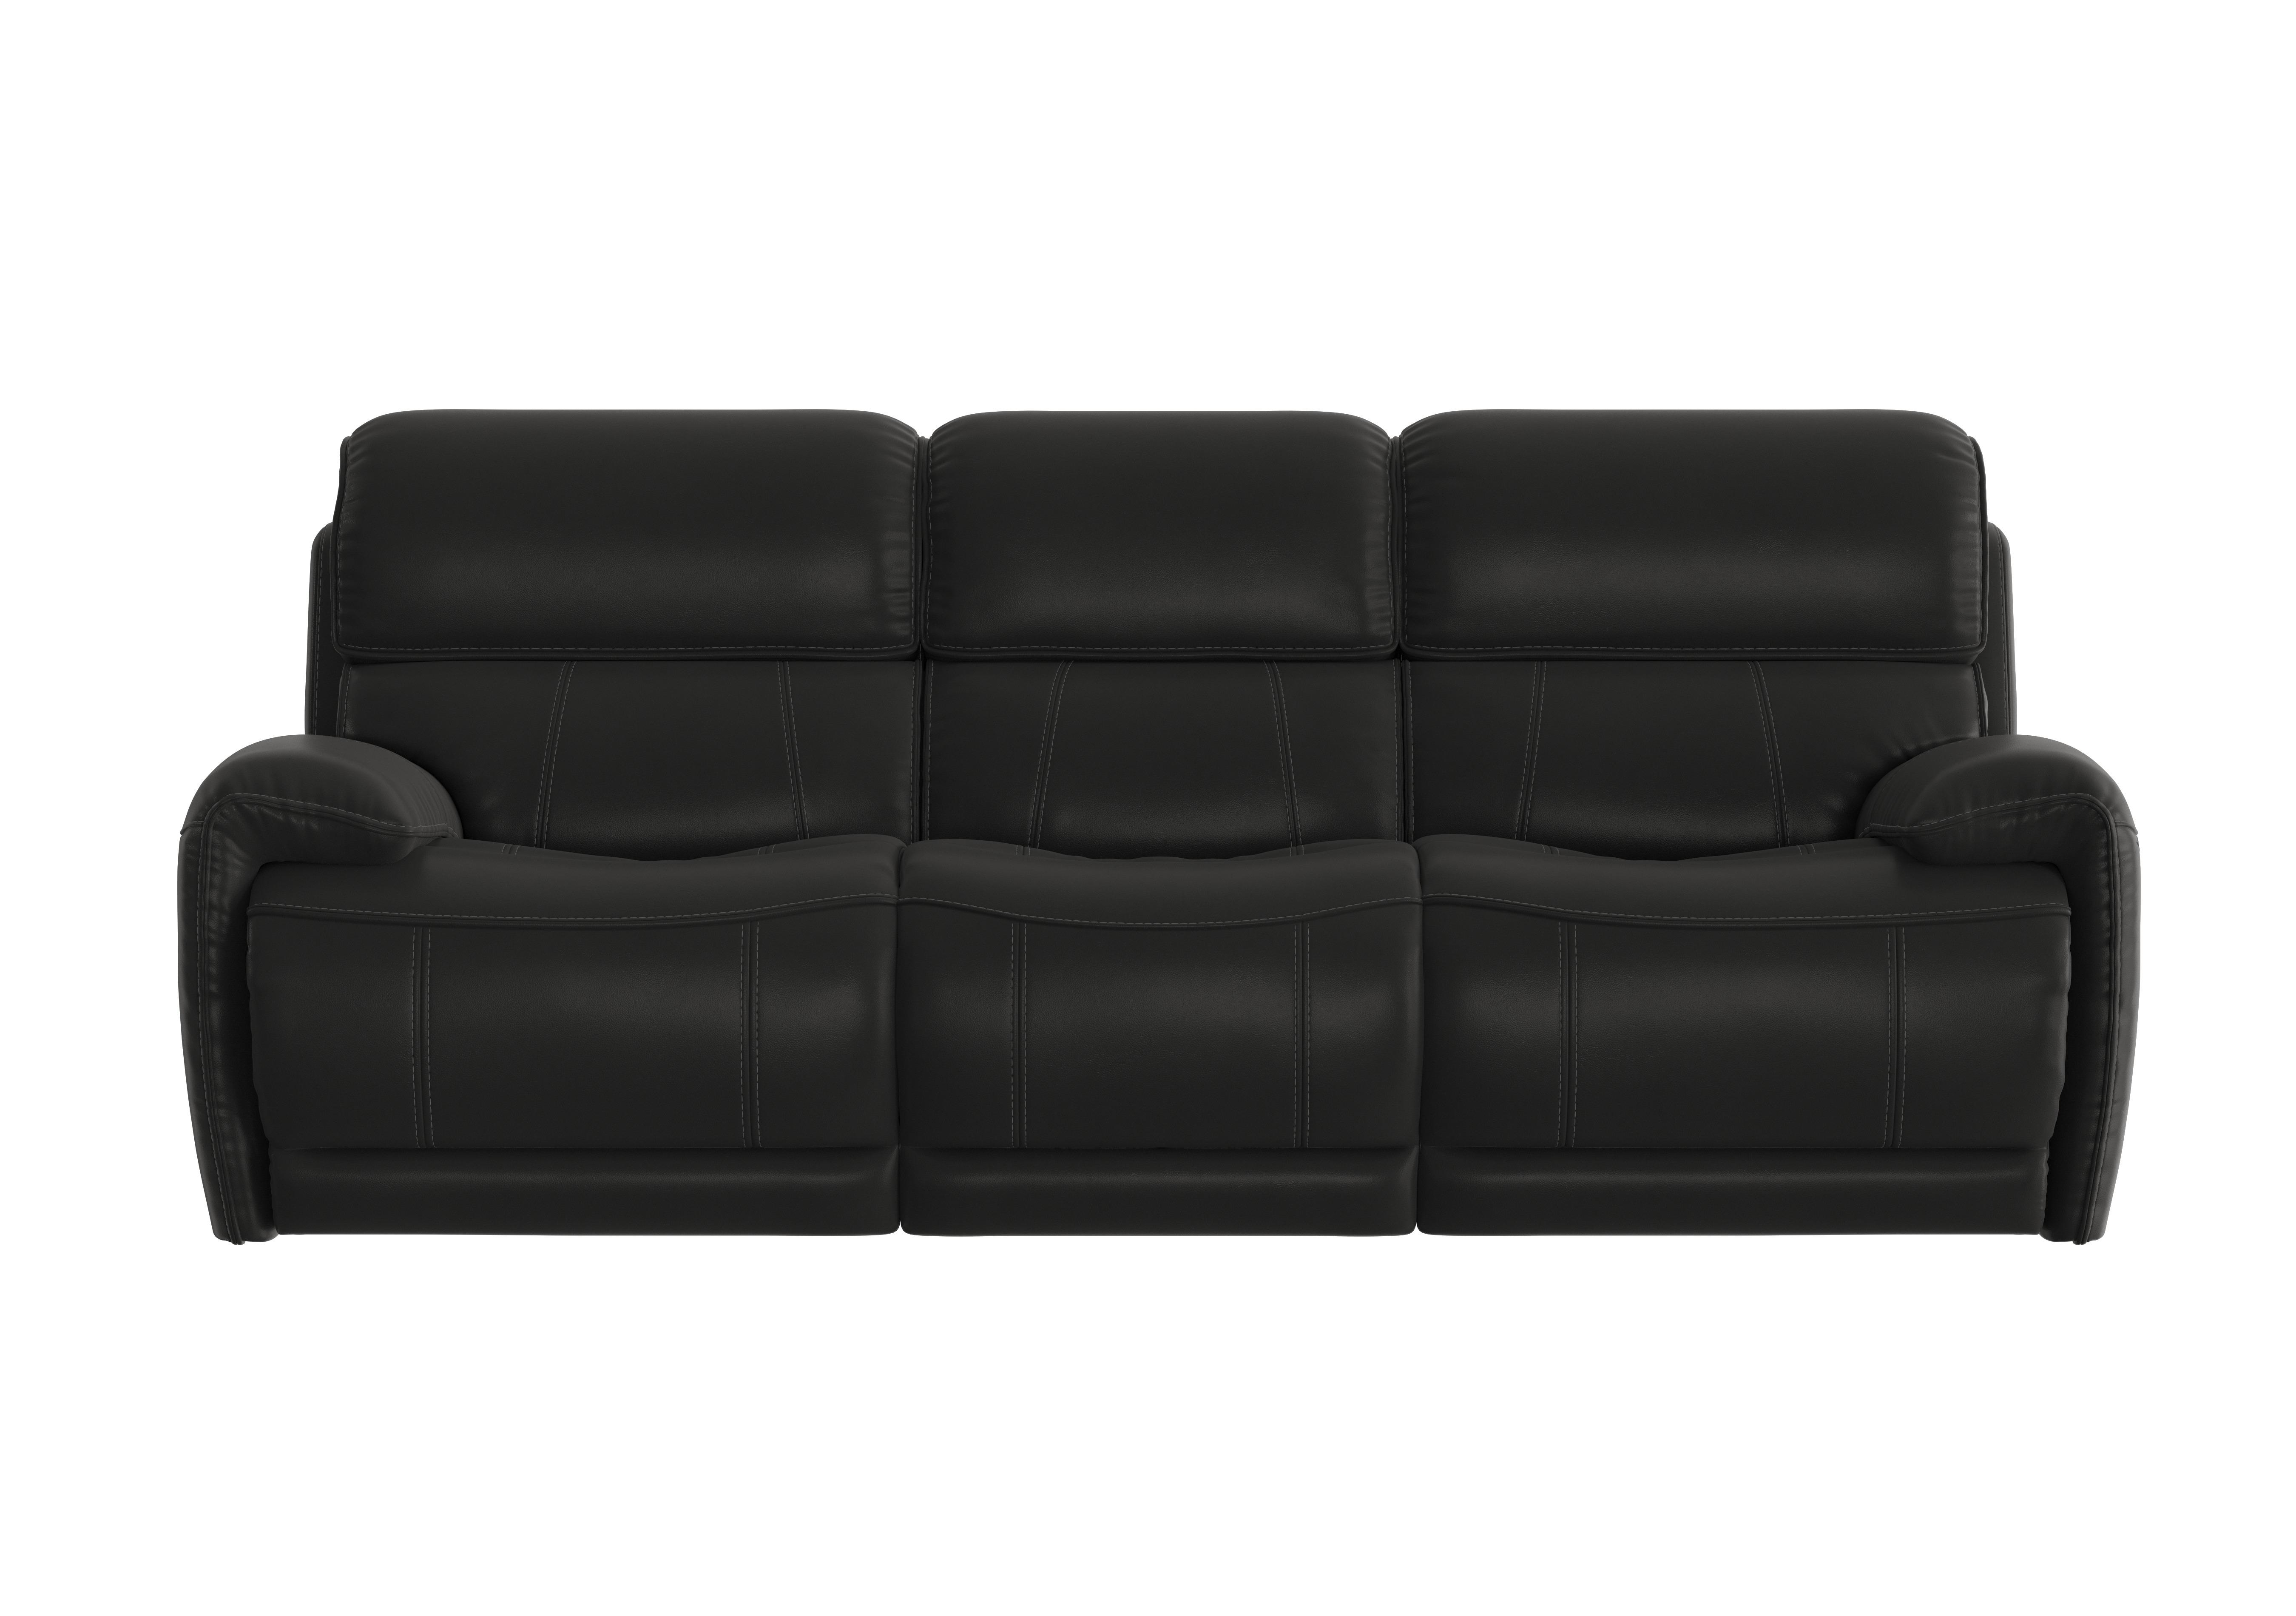 Link 3 Seater Leather Power Recliner Sofa with Power Headrests in Bv-3500 Classic Black on Furniture Village